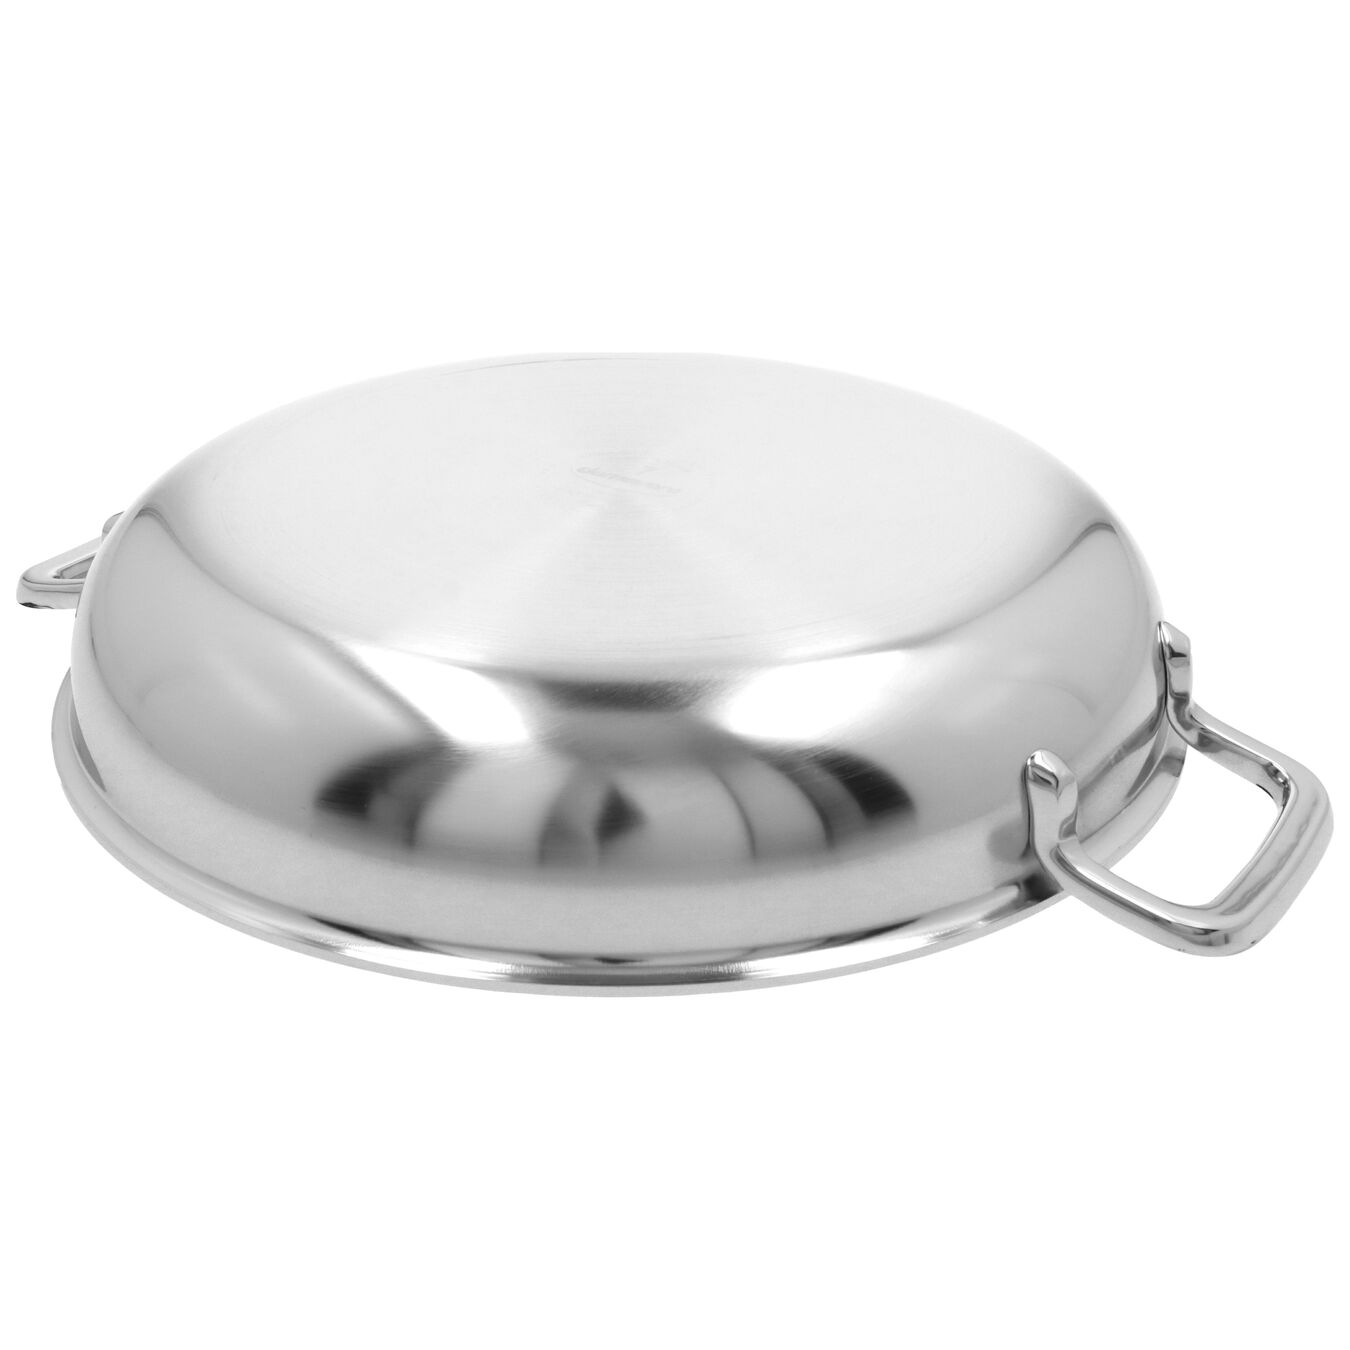 28 cm / 11 inch 18/10 Stainless Steel Frying pan with 2 handles,,large 4